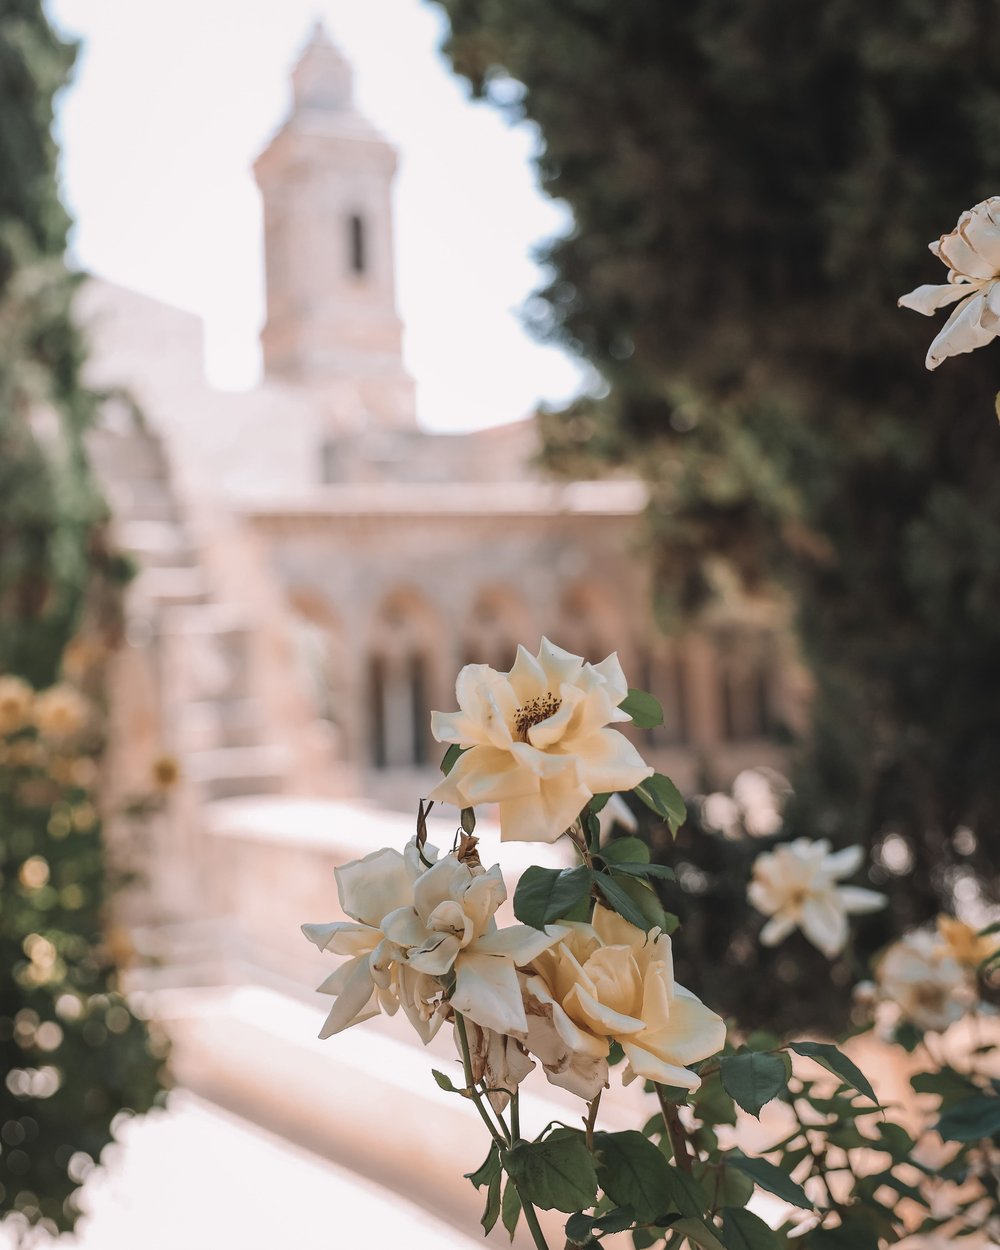 The beautiful flowers at Pater Noster - Old Town - Jerusalem - Israel